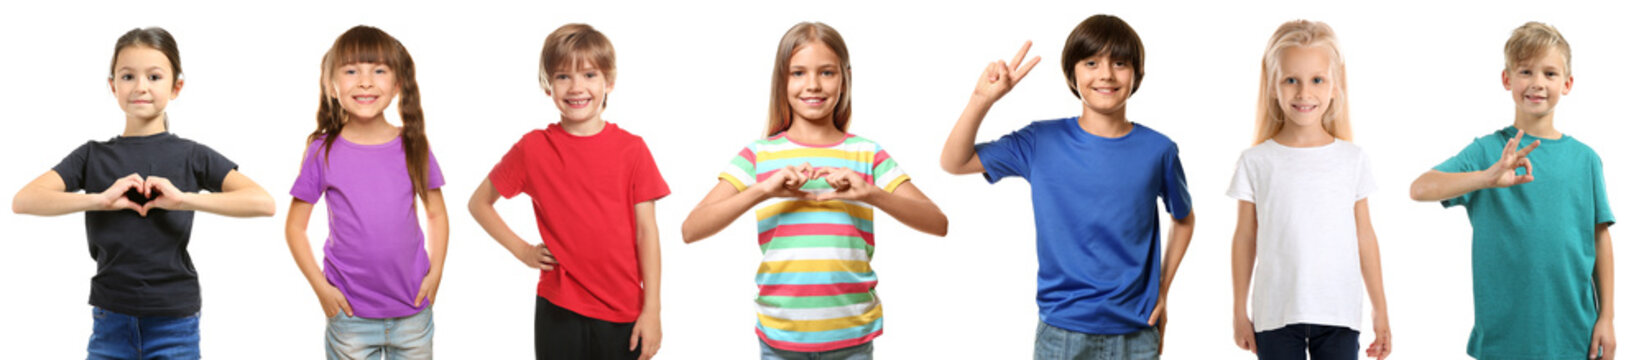 Cute children in different t-shirts on white background